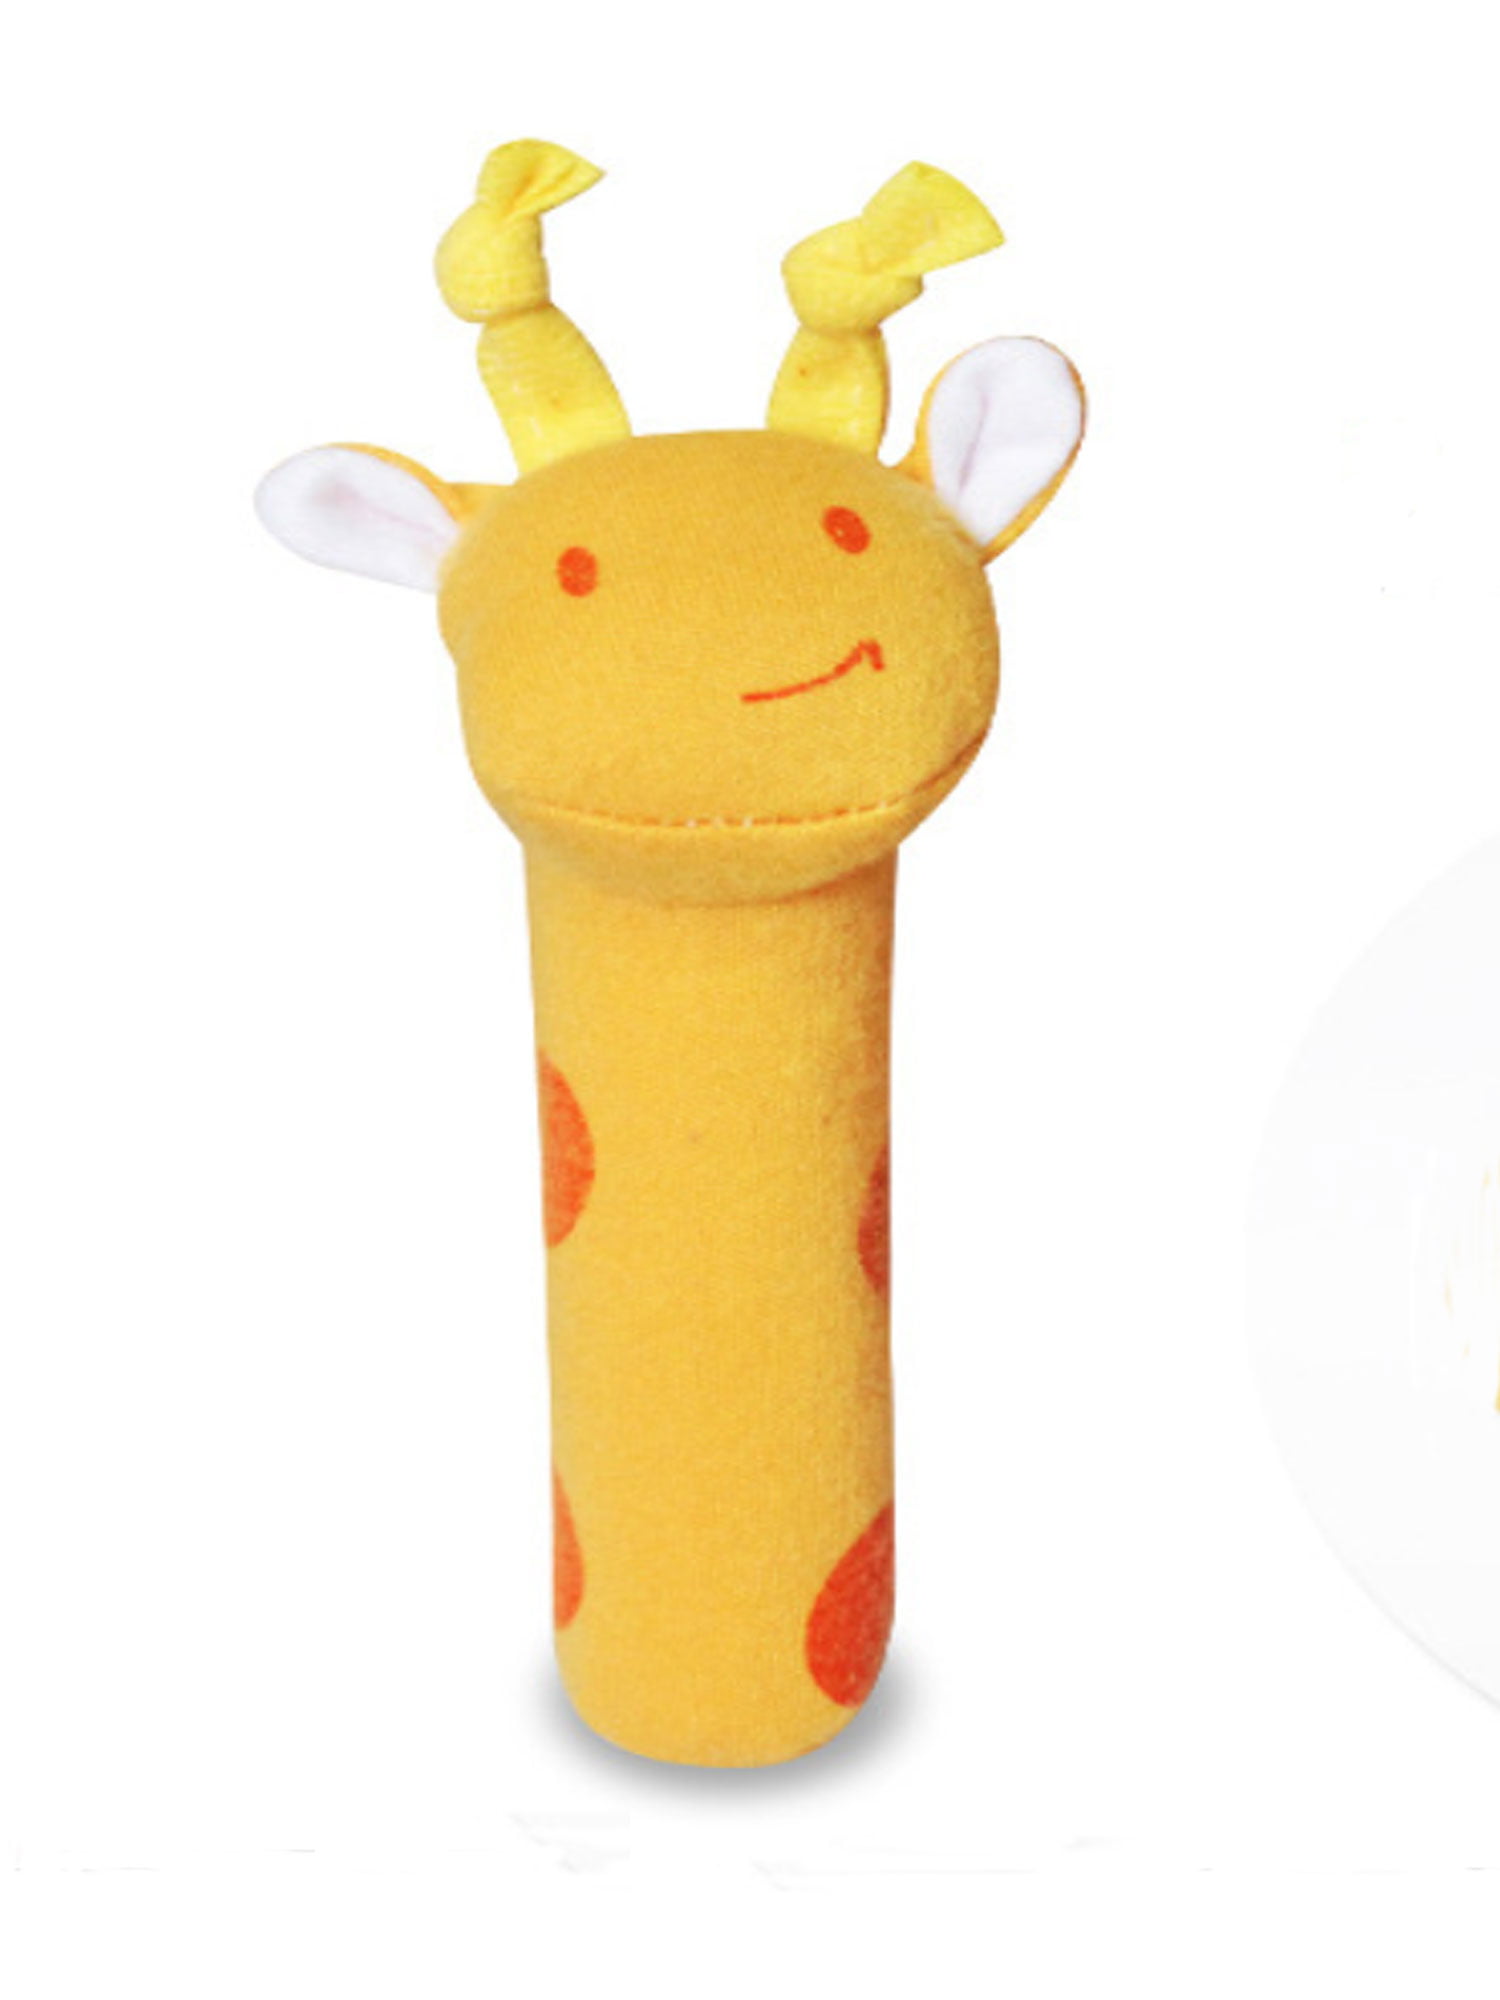 HOT Soft Sound Animal Handbells Plush Squeeze Rattle Toys For Newborn Baby Gifts 